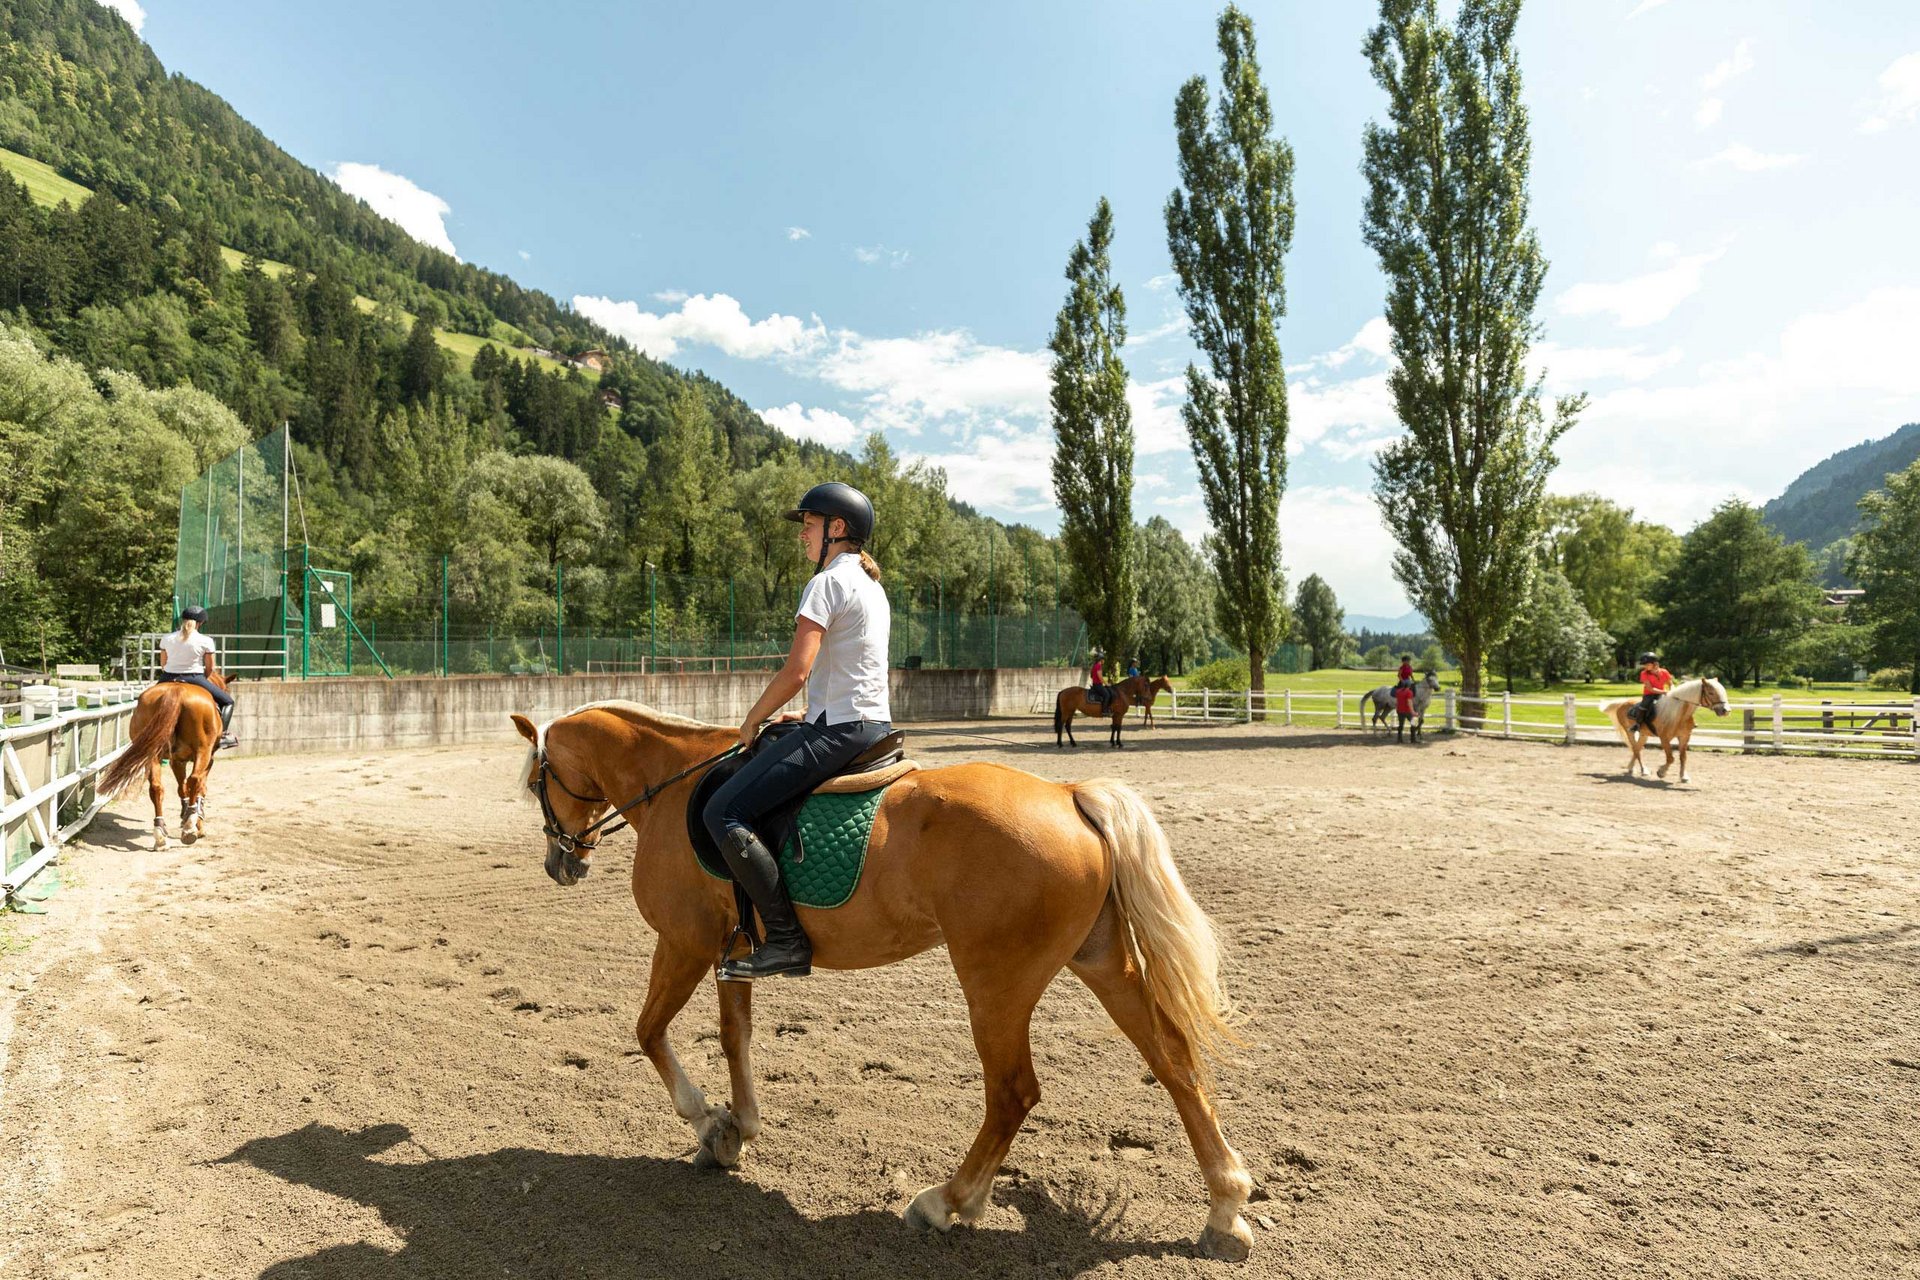 5-star hotel in South Tyrol: horse riding and wellness